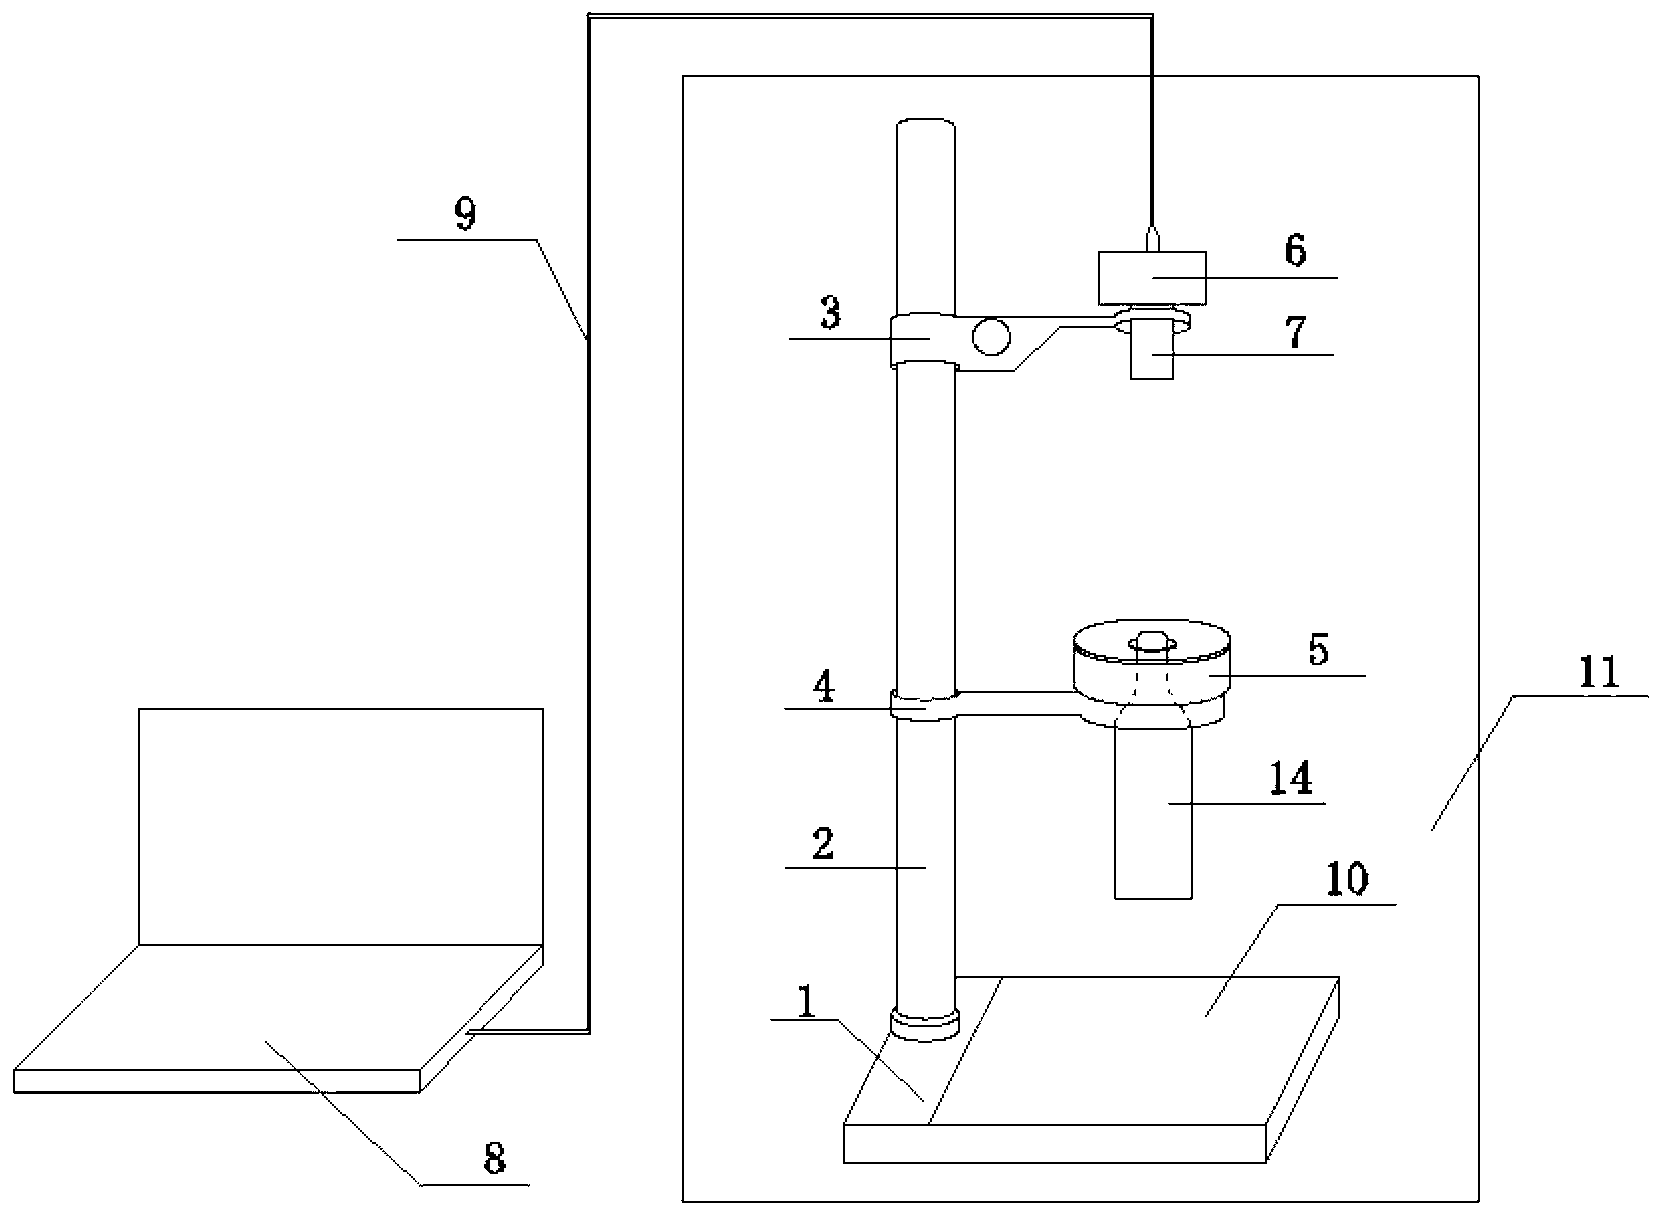 Device and method for measuring internal and external diameters of transparent glass bottleneck based on machine vision